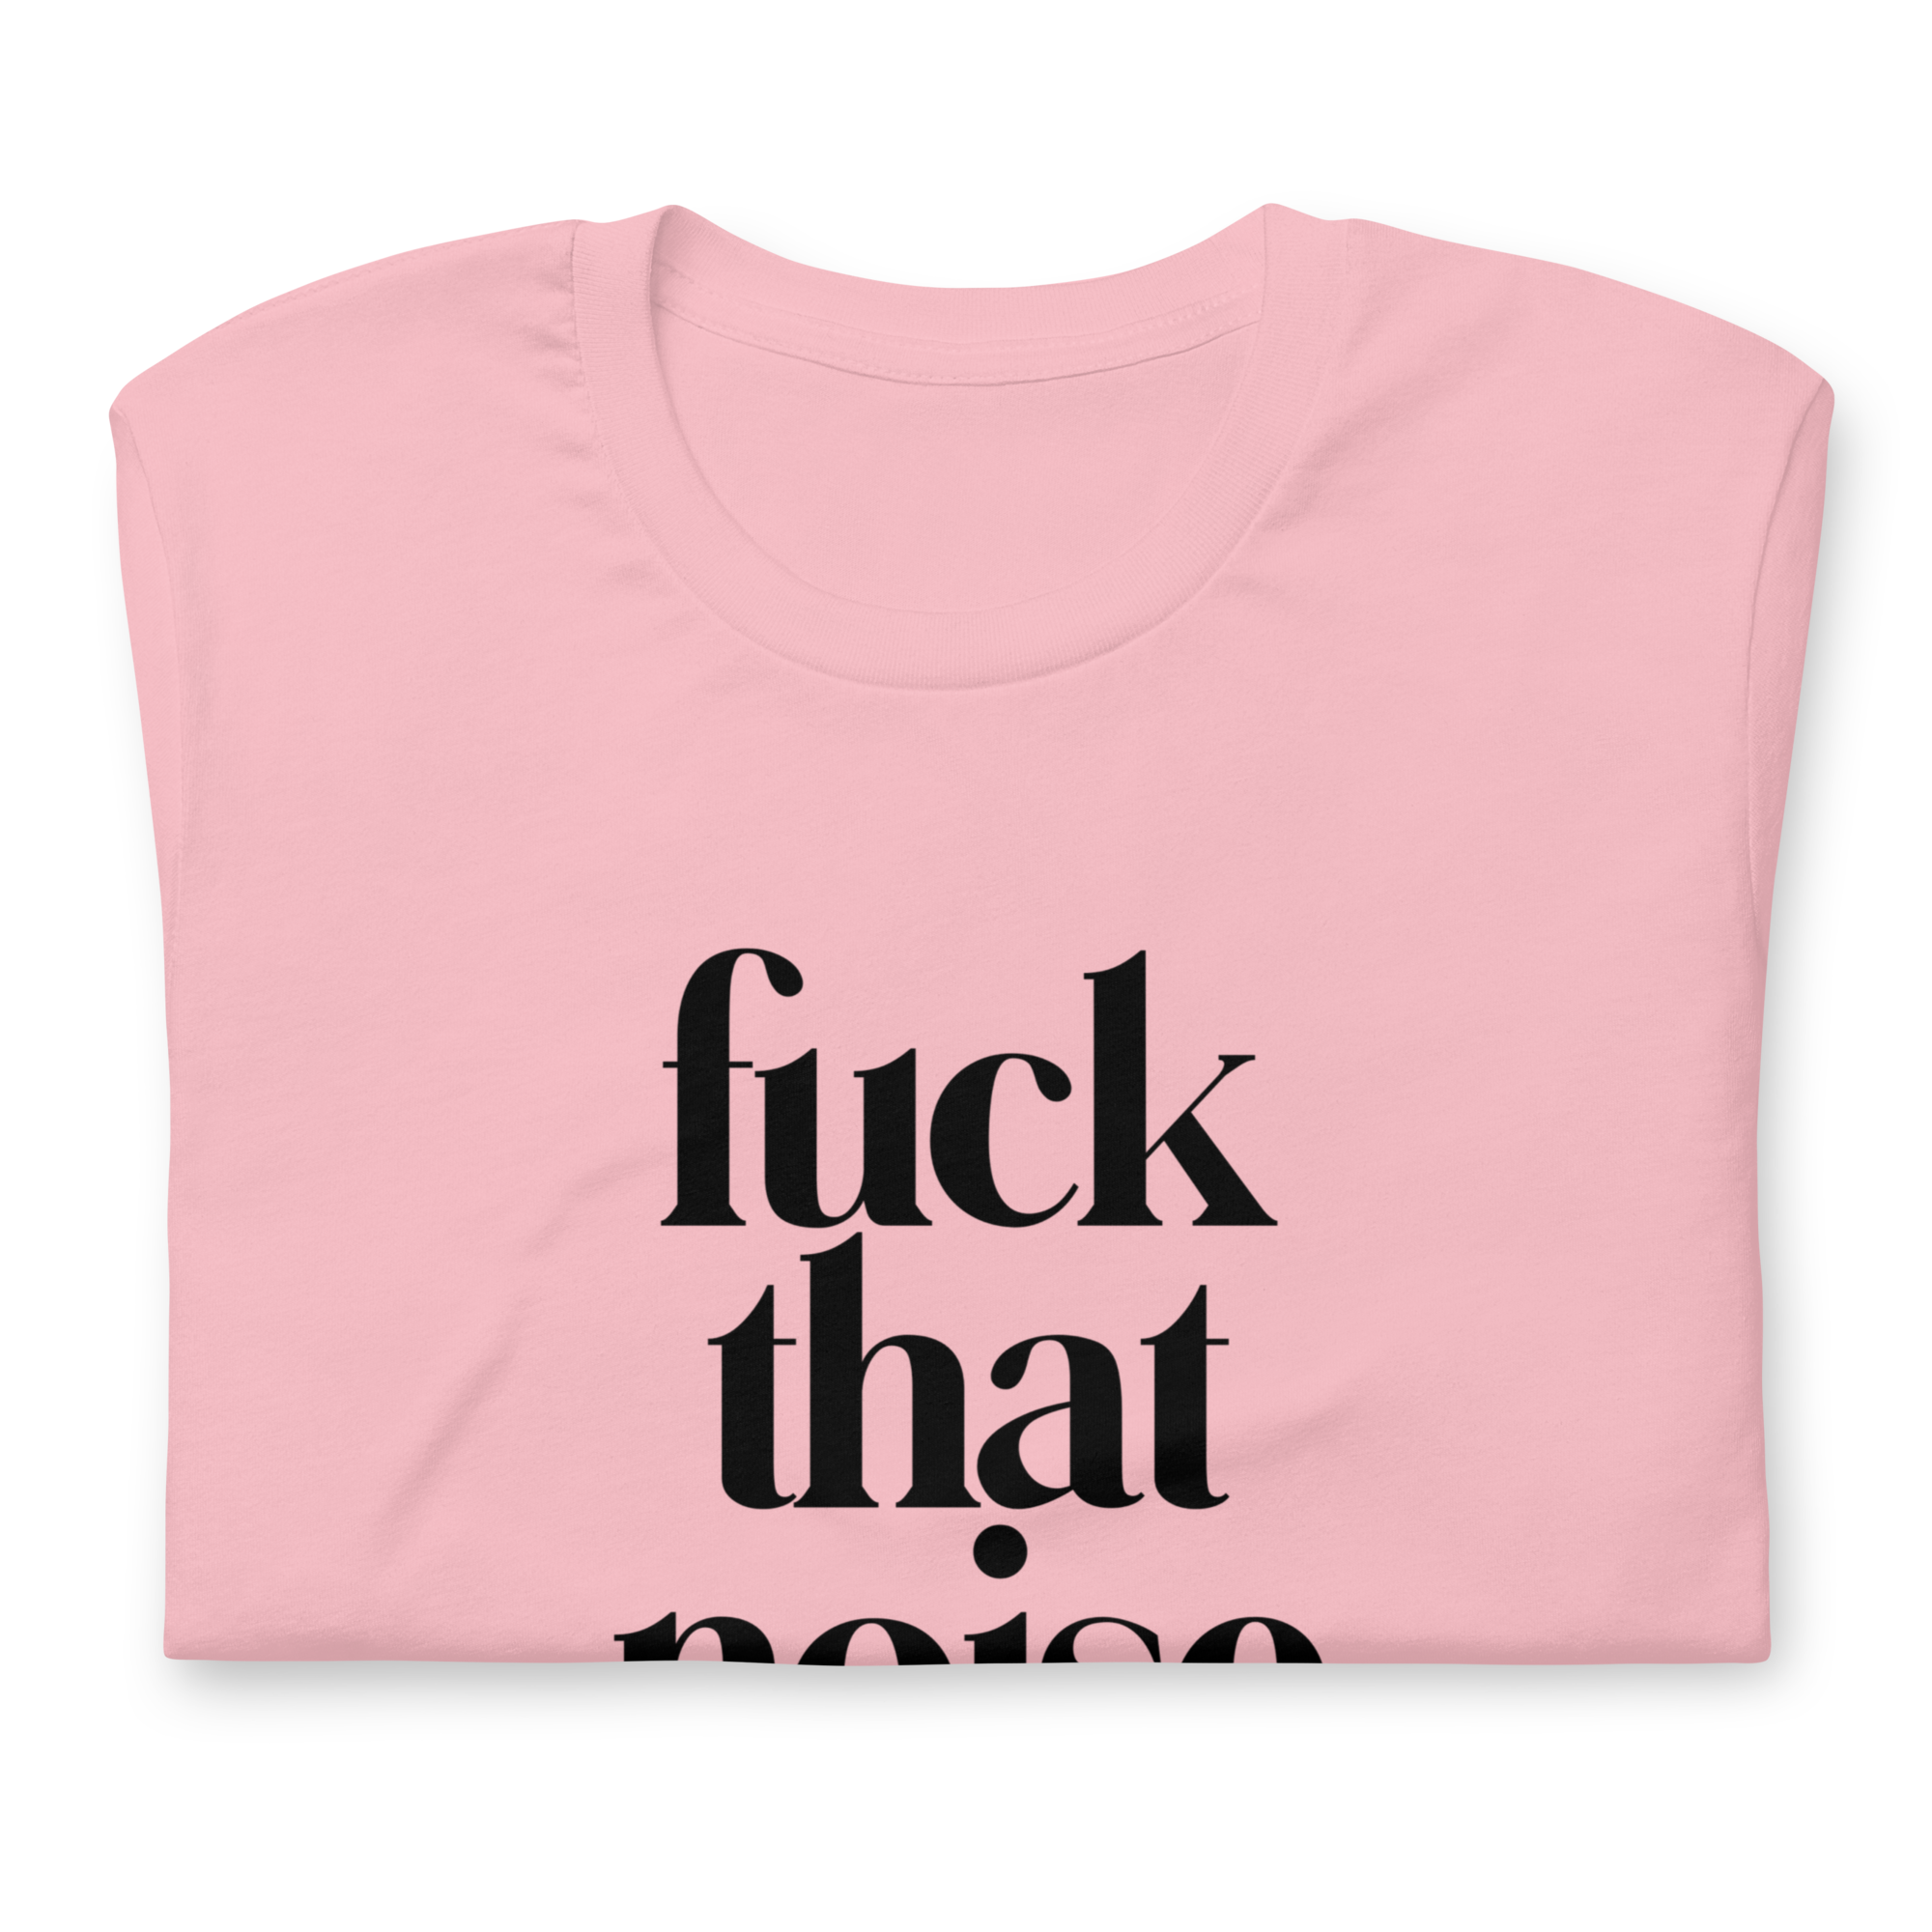 Fuck That Noise [In Your Head] Loose Fit Tee - Yoga Bitch